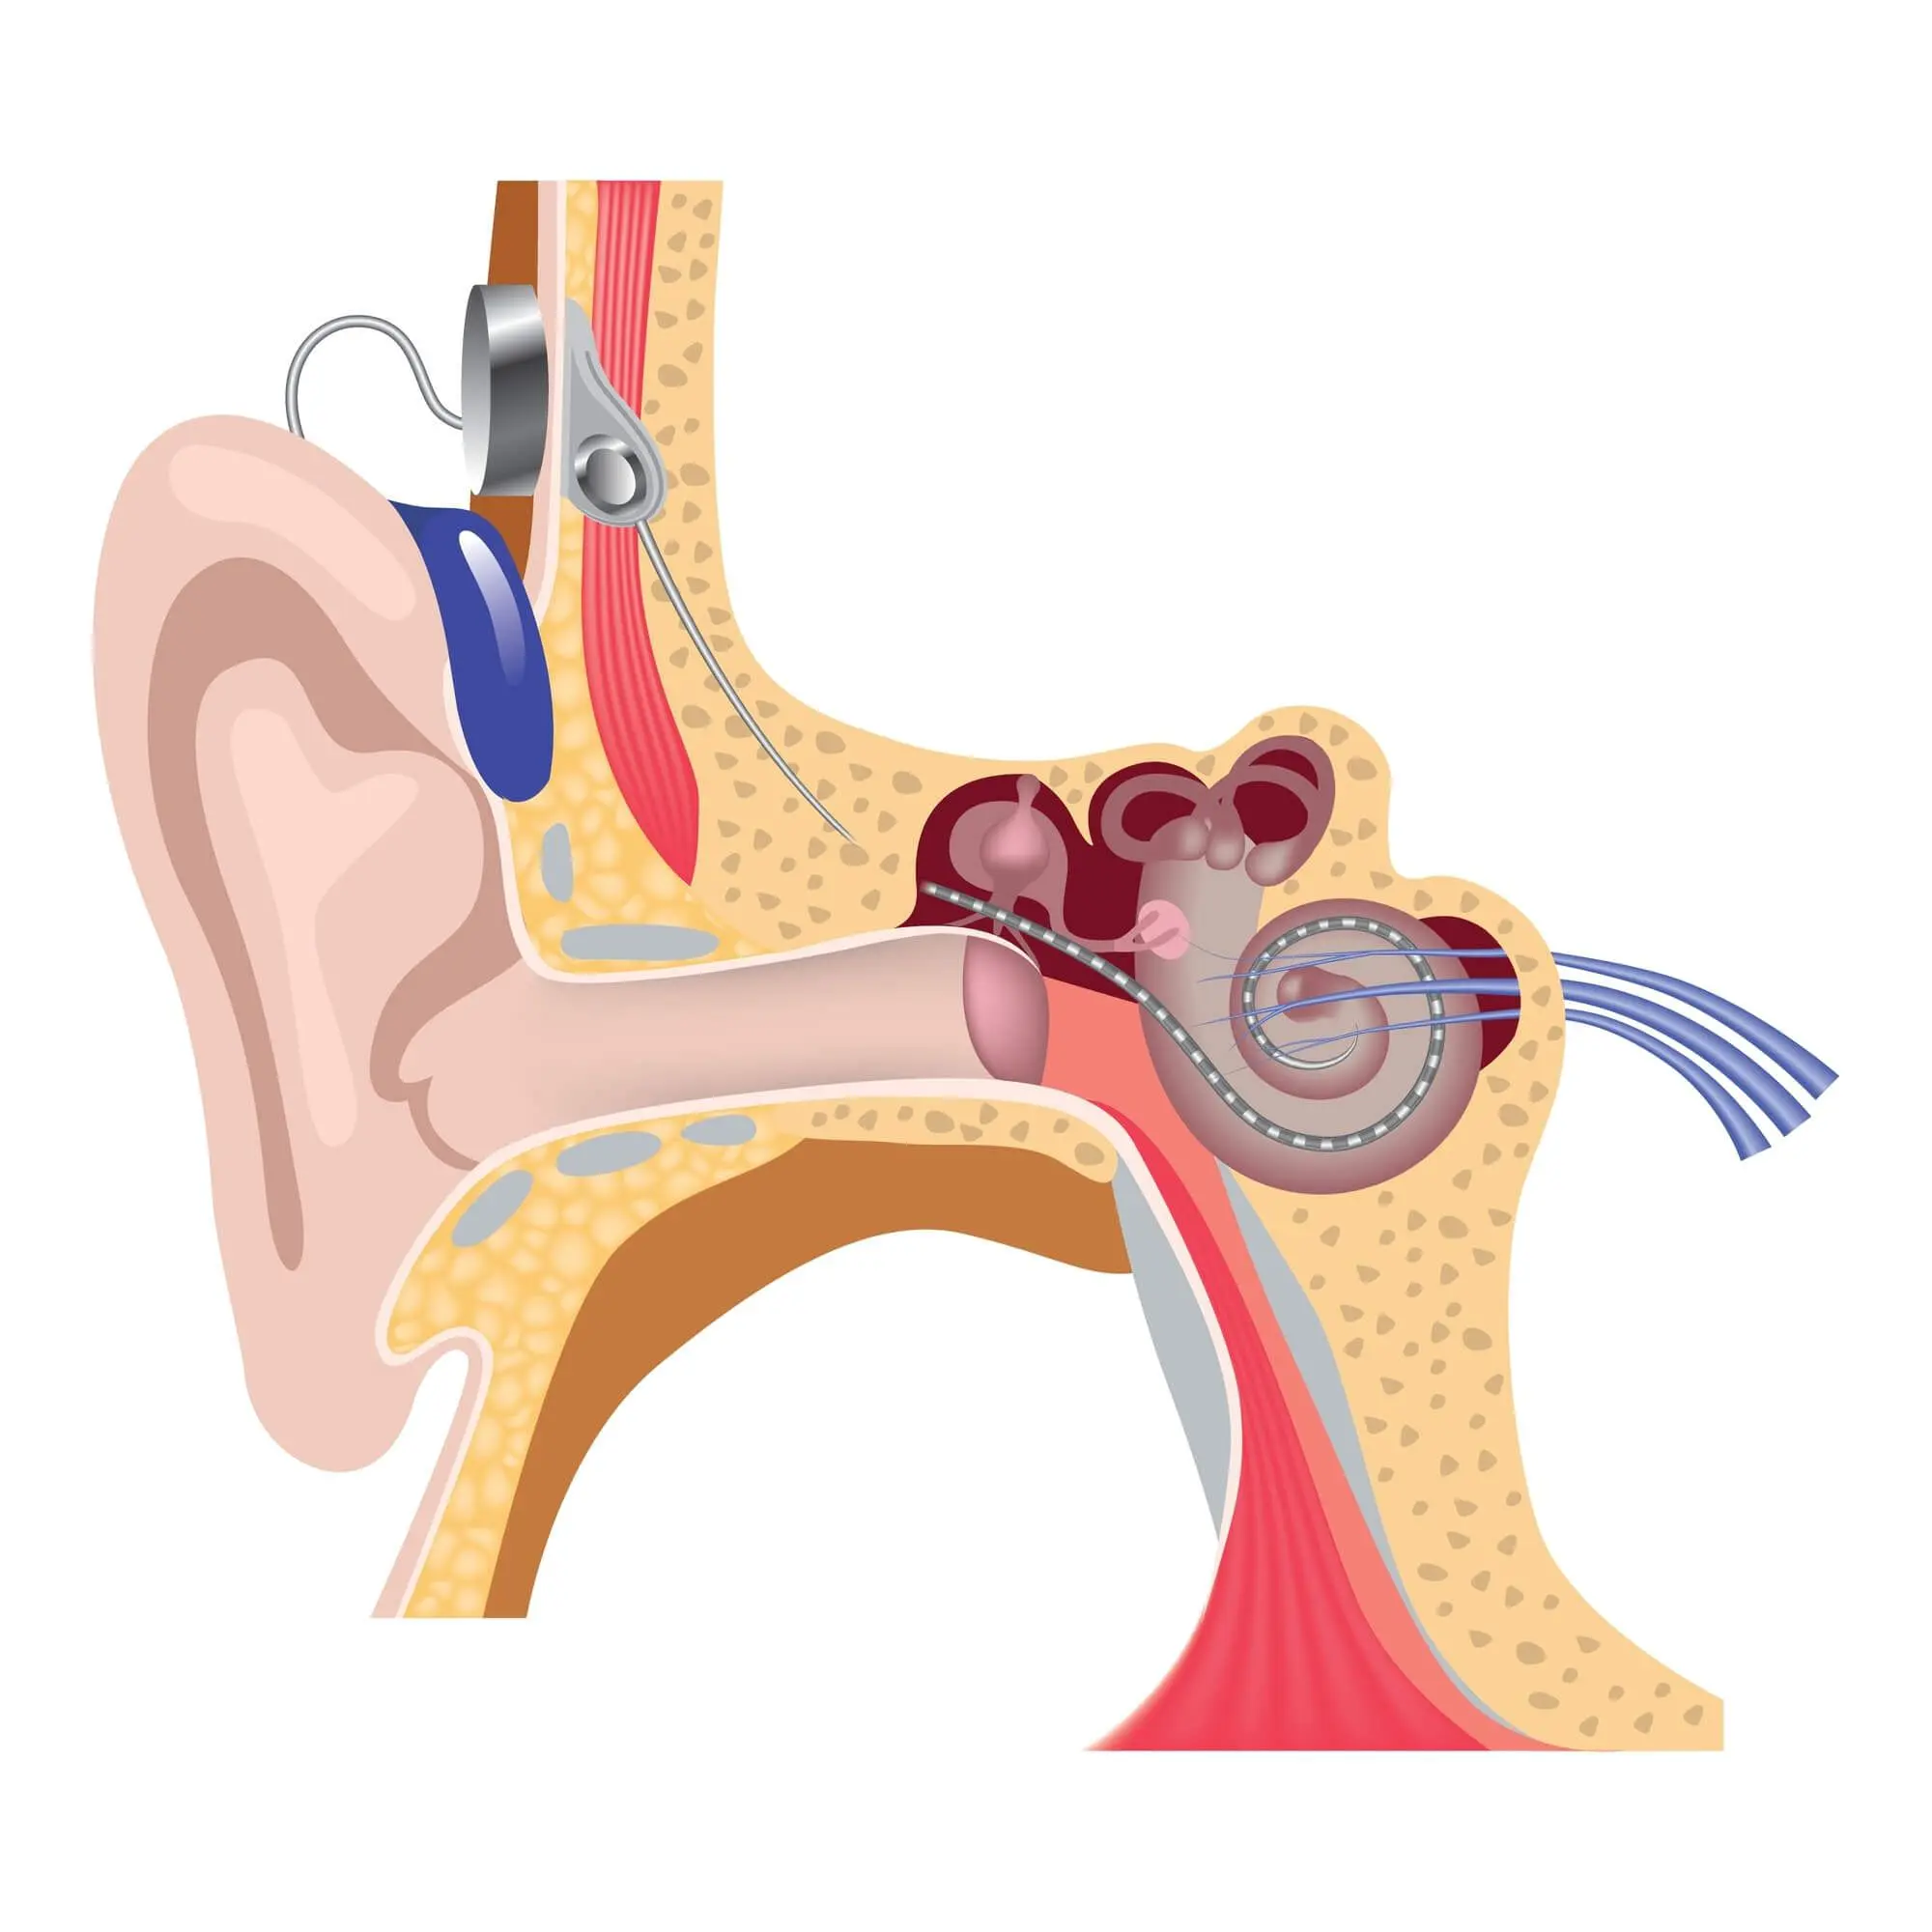 The bones of the middle ear become enlarged in otosclerosis